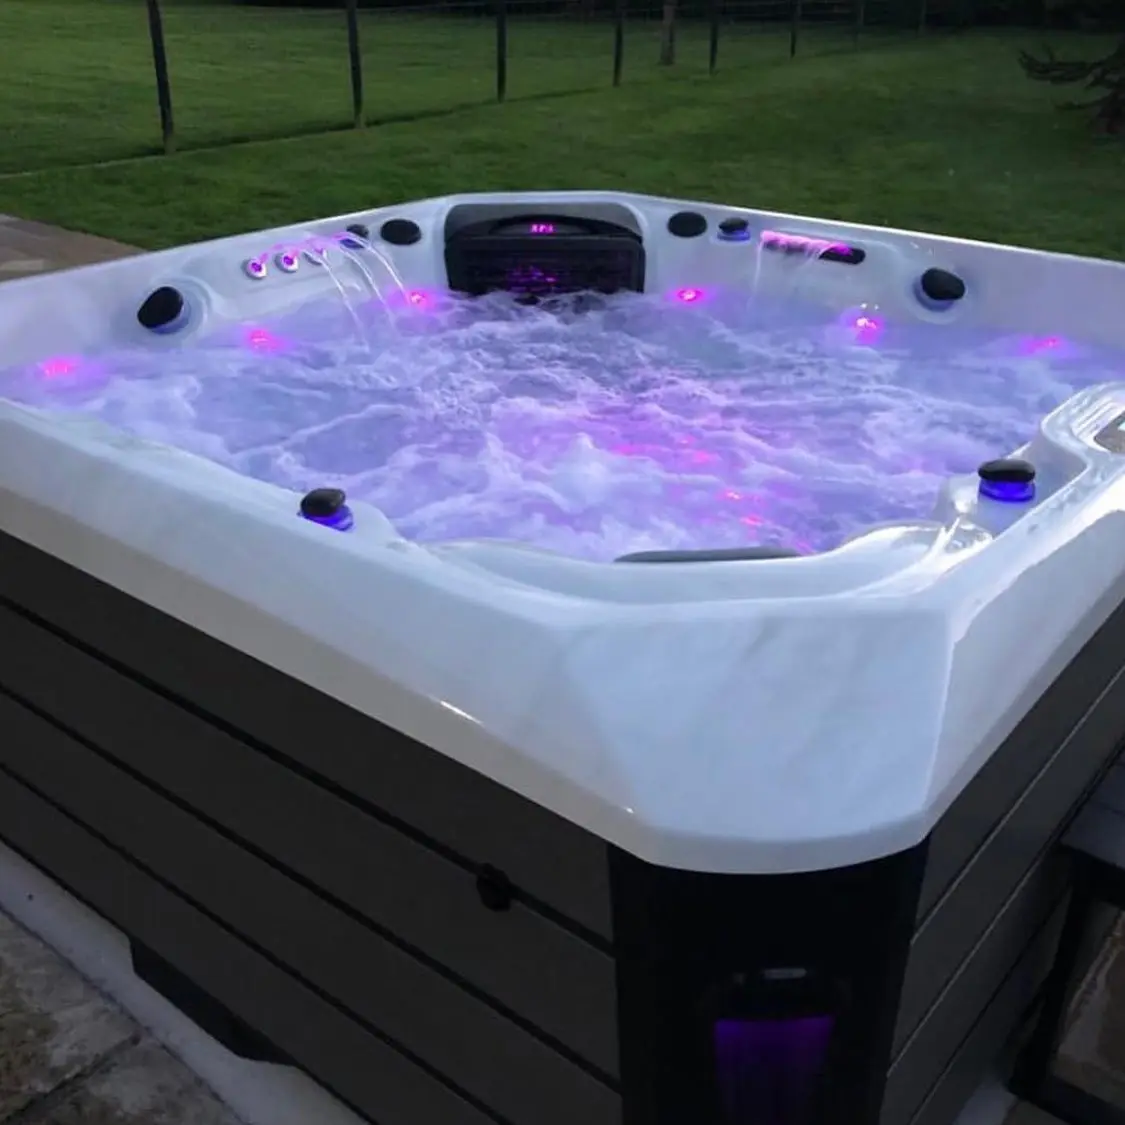 

Sunrans 6 Person Whirlpool Massage Spa Bathtub Outdoor Acrylic Luxury Hot Tub For Backyard With Touchscreen Panel